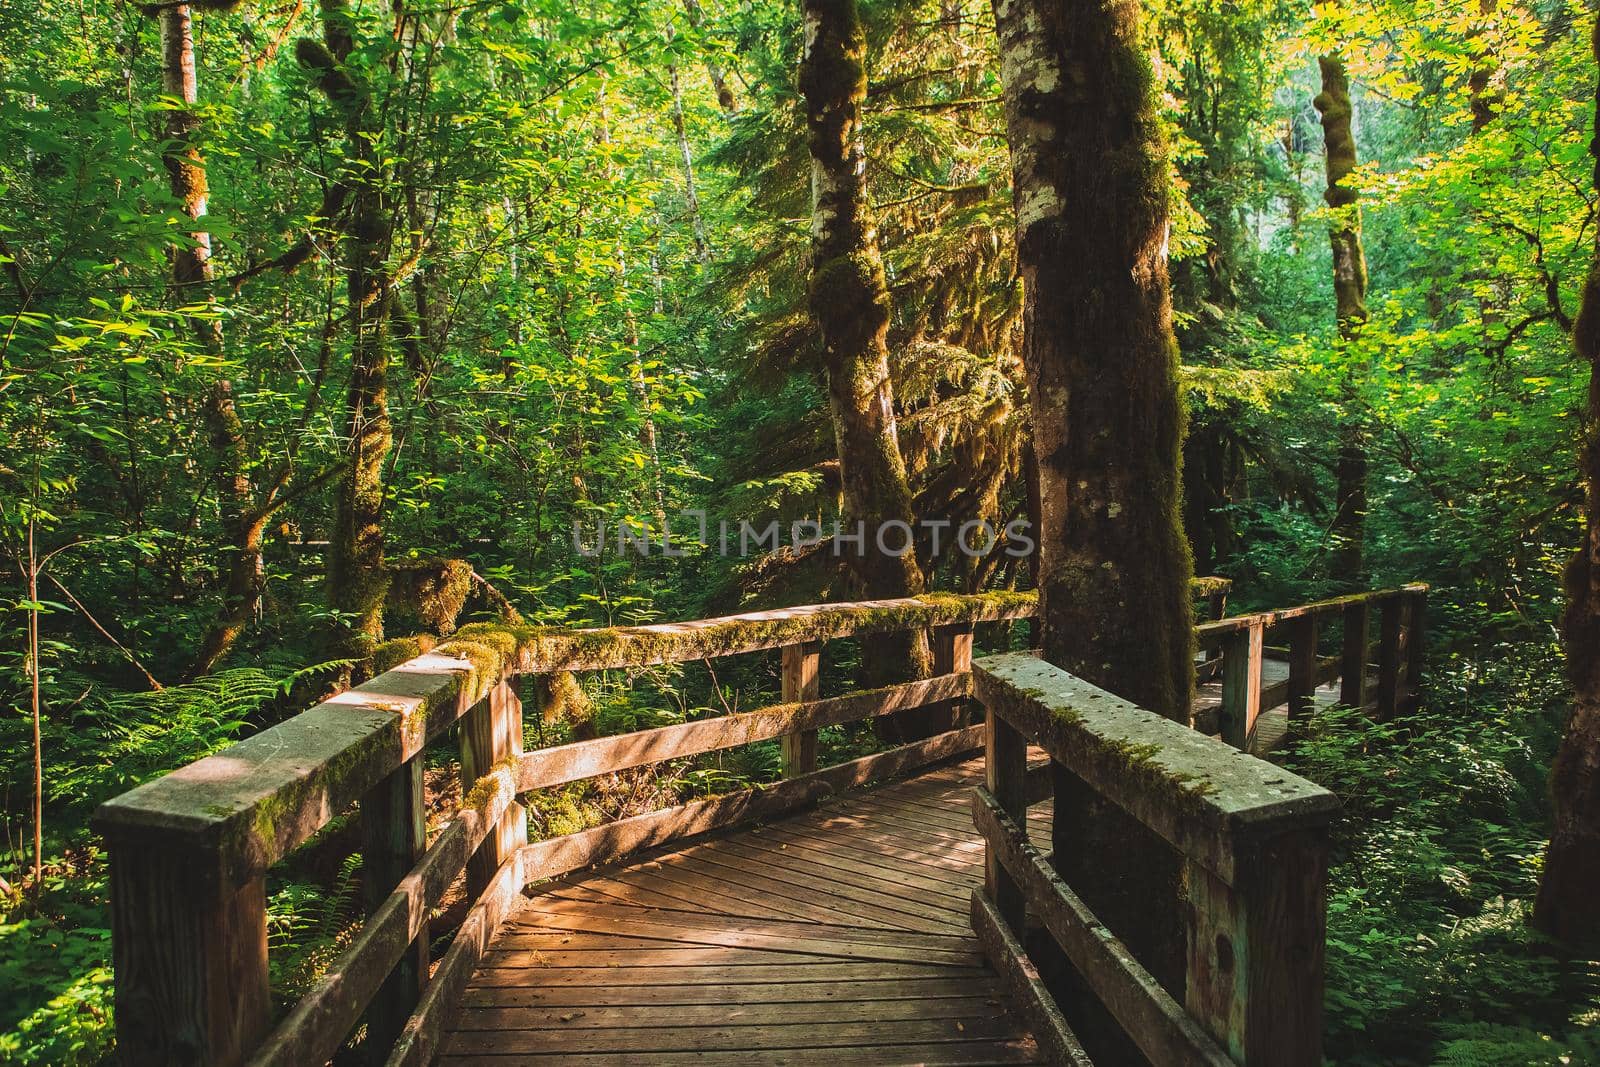 Mysterious path in the magical forest. Wooden boardwalk trail through Wildwood Recreation area, Oregon, USA.